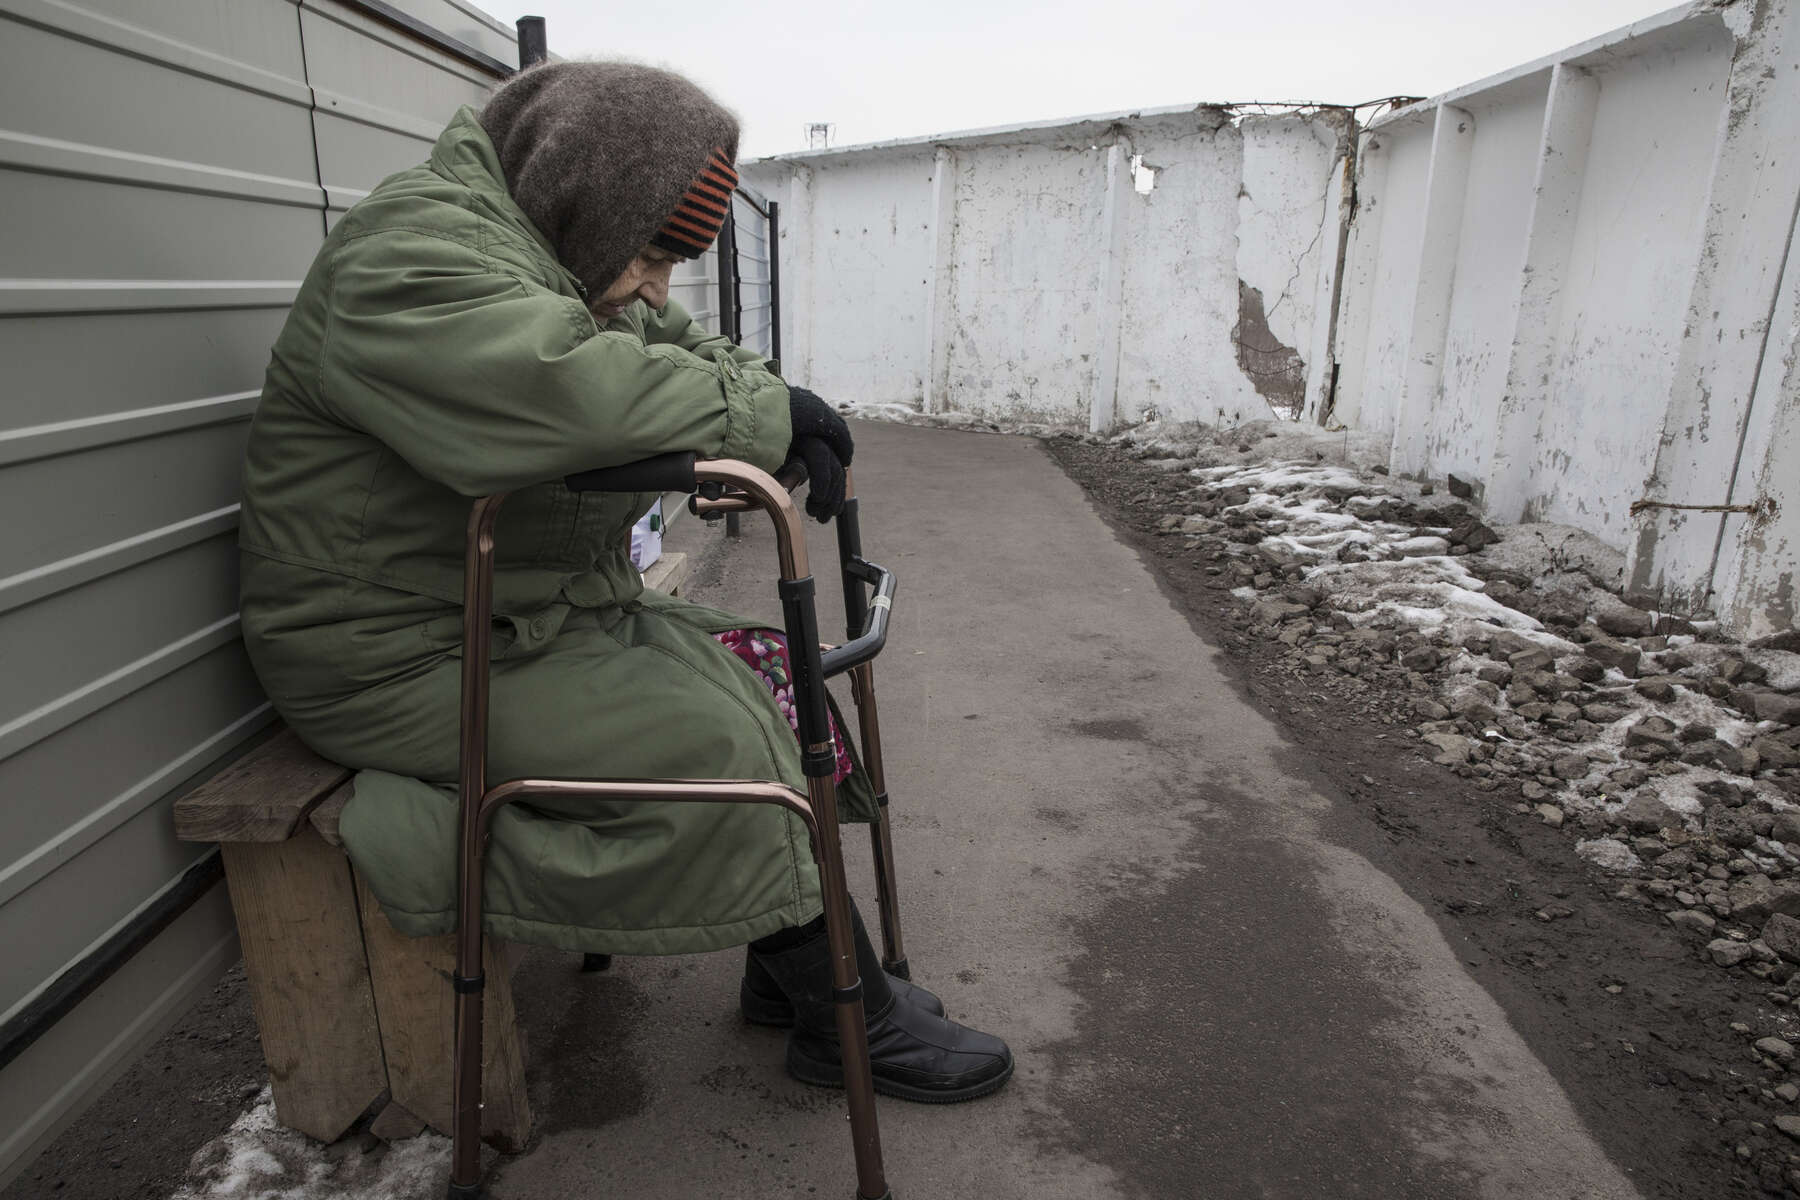 Mayorsk : An elderly handicapped woman rests after trying to walk the long distance in the cold to cross the border from Donetsk to the government-controlled territory of Ukraine in order to collect her pension. There is no regular wheelchair assistance when crossing the border area. 